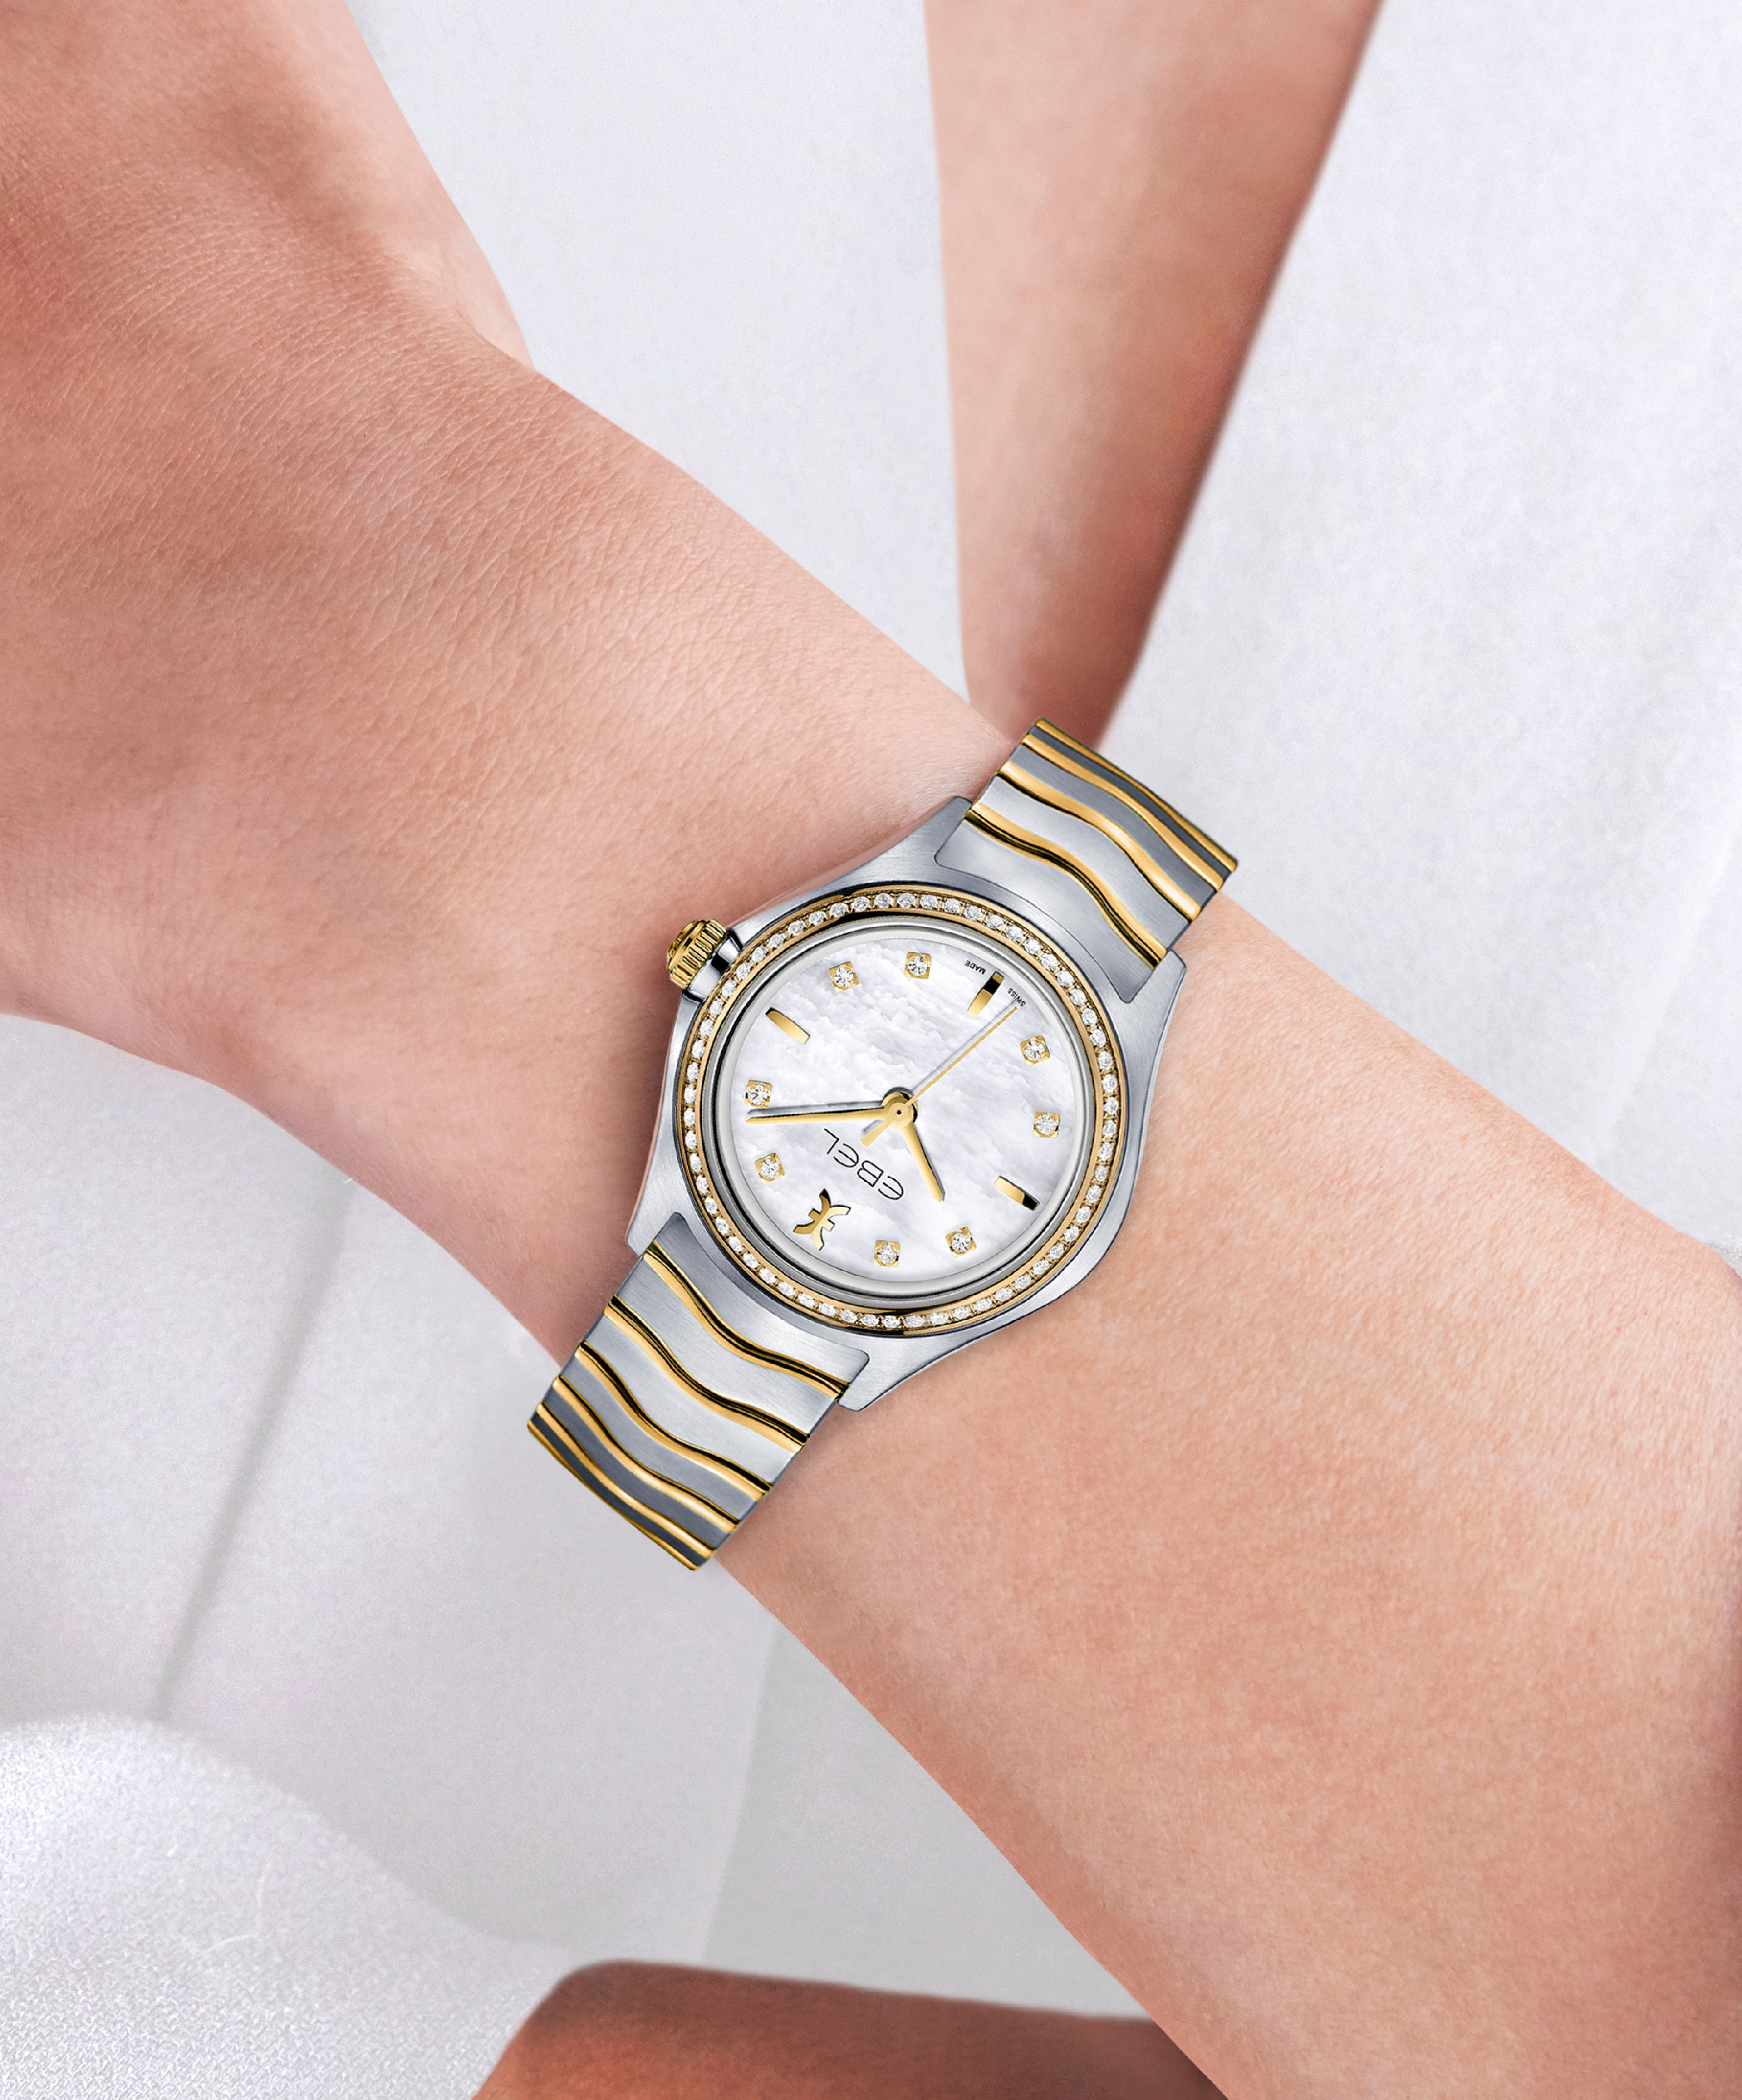 EBEL | Women's Watch EBEL Wave, stainless steel and 18K yellow gold